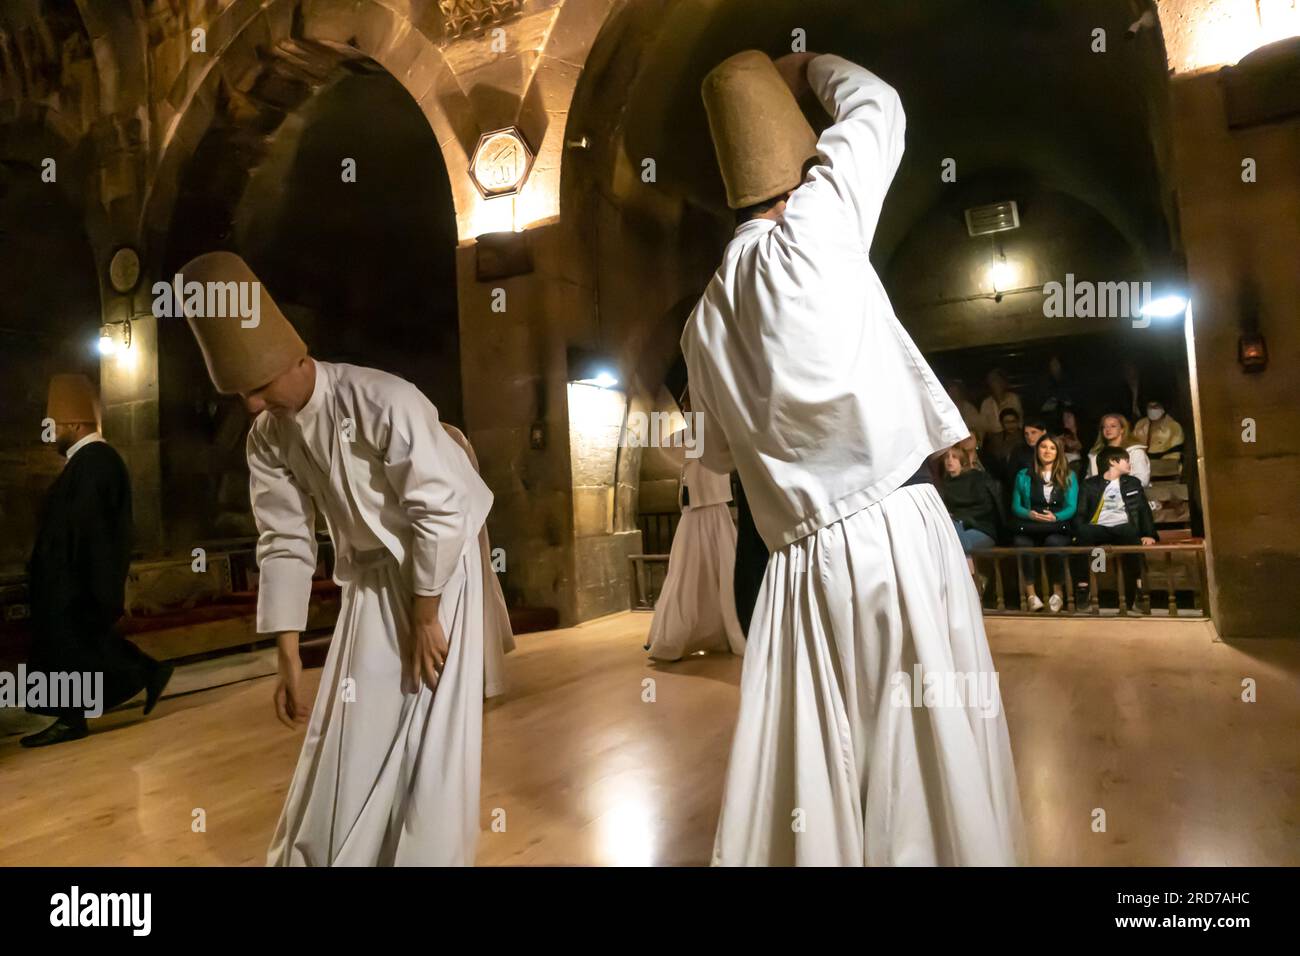 Sufi whirling dervishes from  Mevlevi order in Turkey the ceremony of Sama dance. Saruhan Caravanserai Cappadocia Turkey Stock Photo